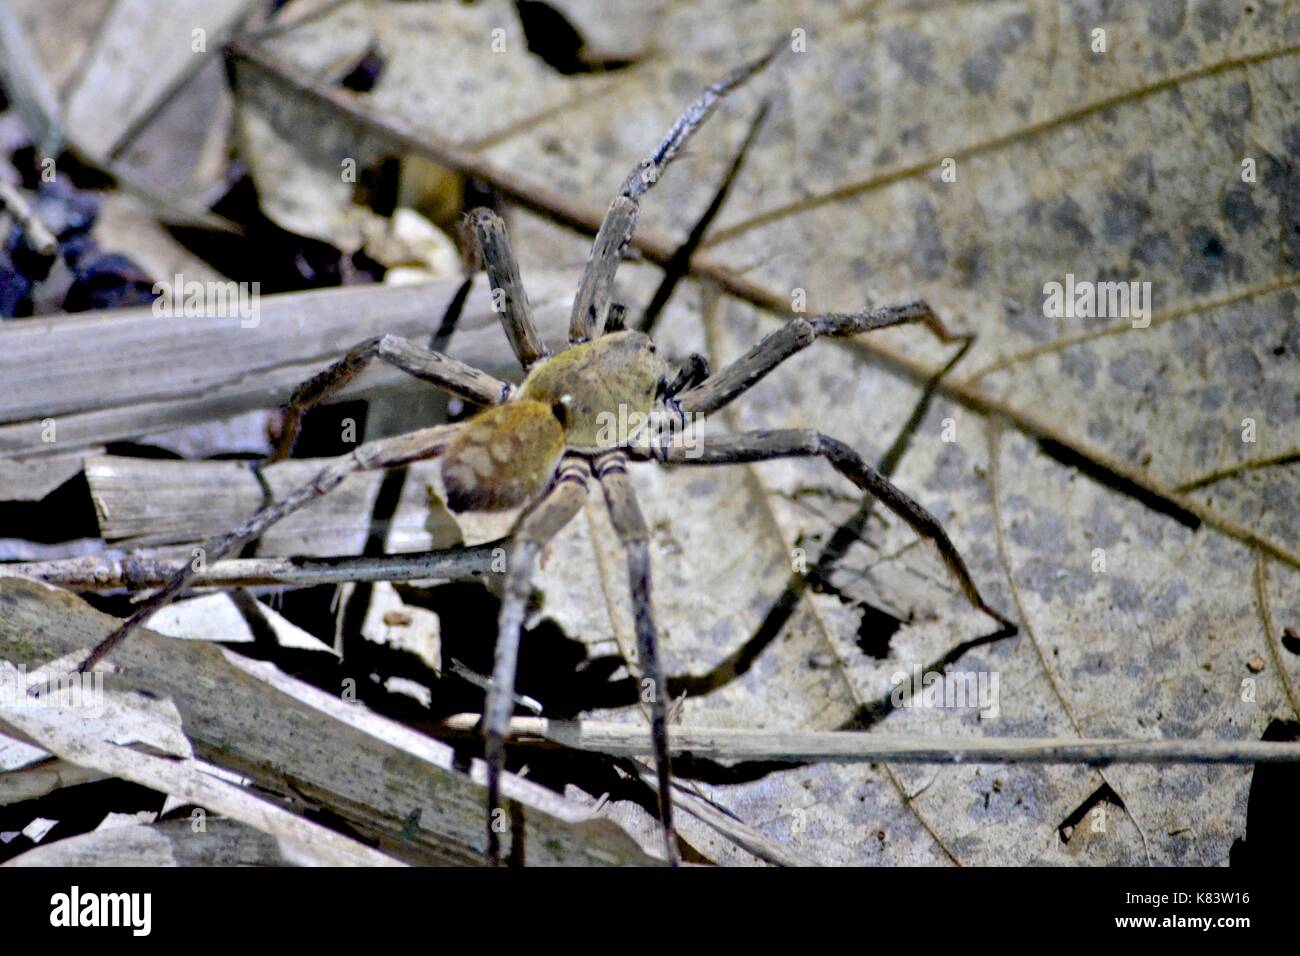 A large spider in the rainforest of the Tambopata National Reserve, Peru Stock Photo